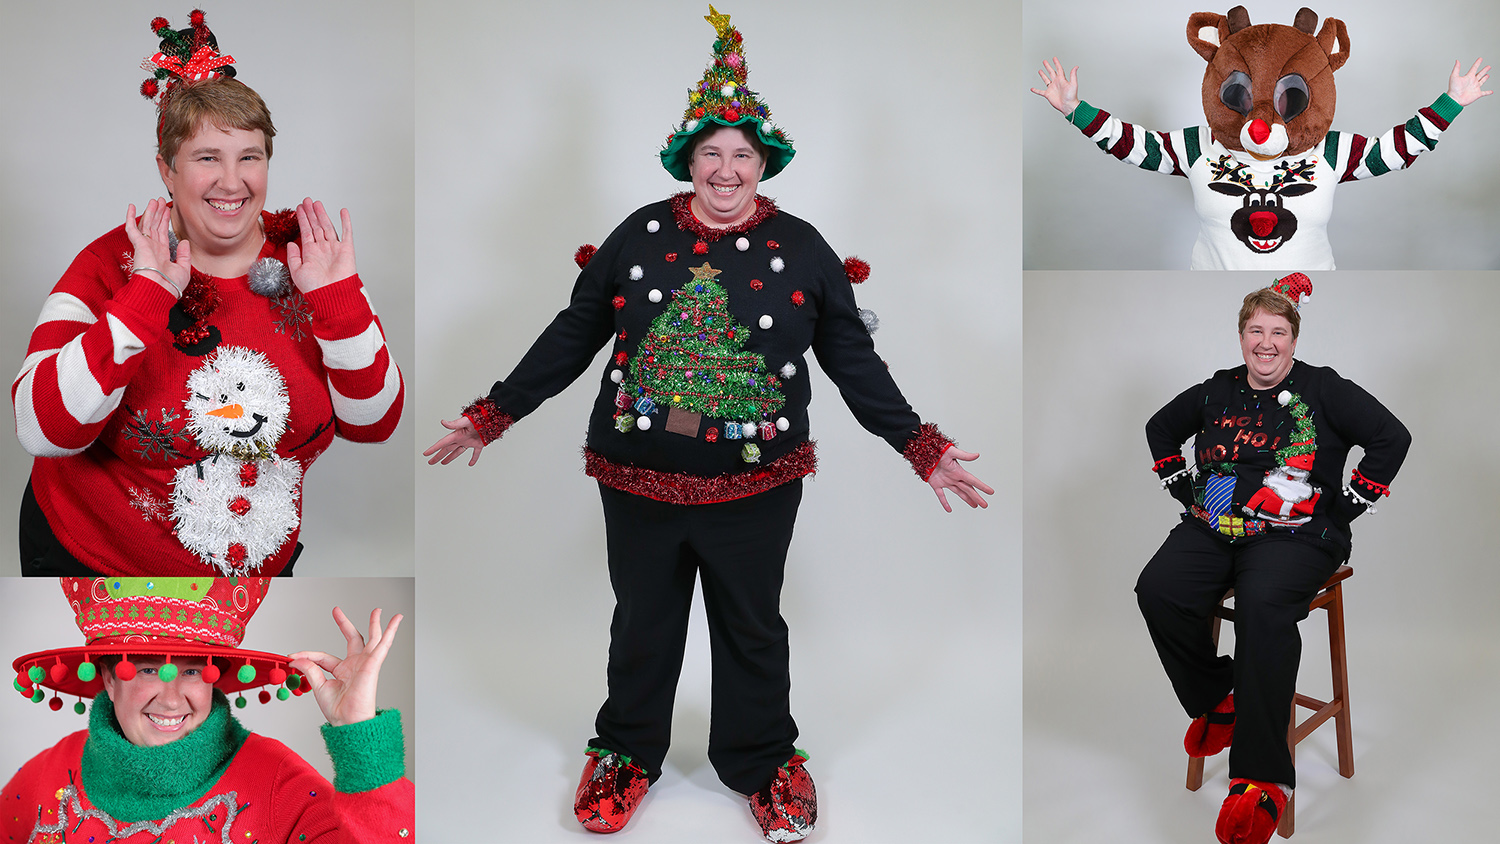 Heather Rhinehart has close to 30 Christmas outfits, allowing her to spread holiday cheer all month. (Photos by Erika Pritchard, UNK Communications)